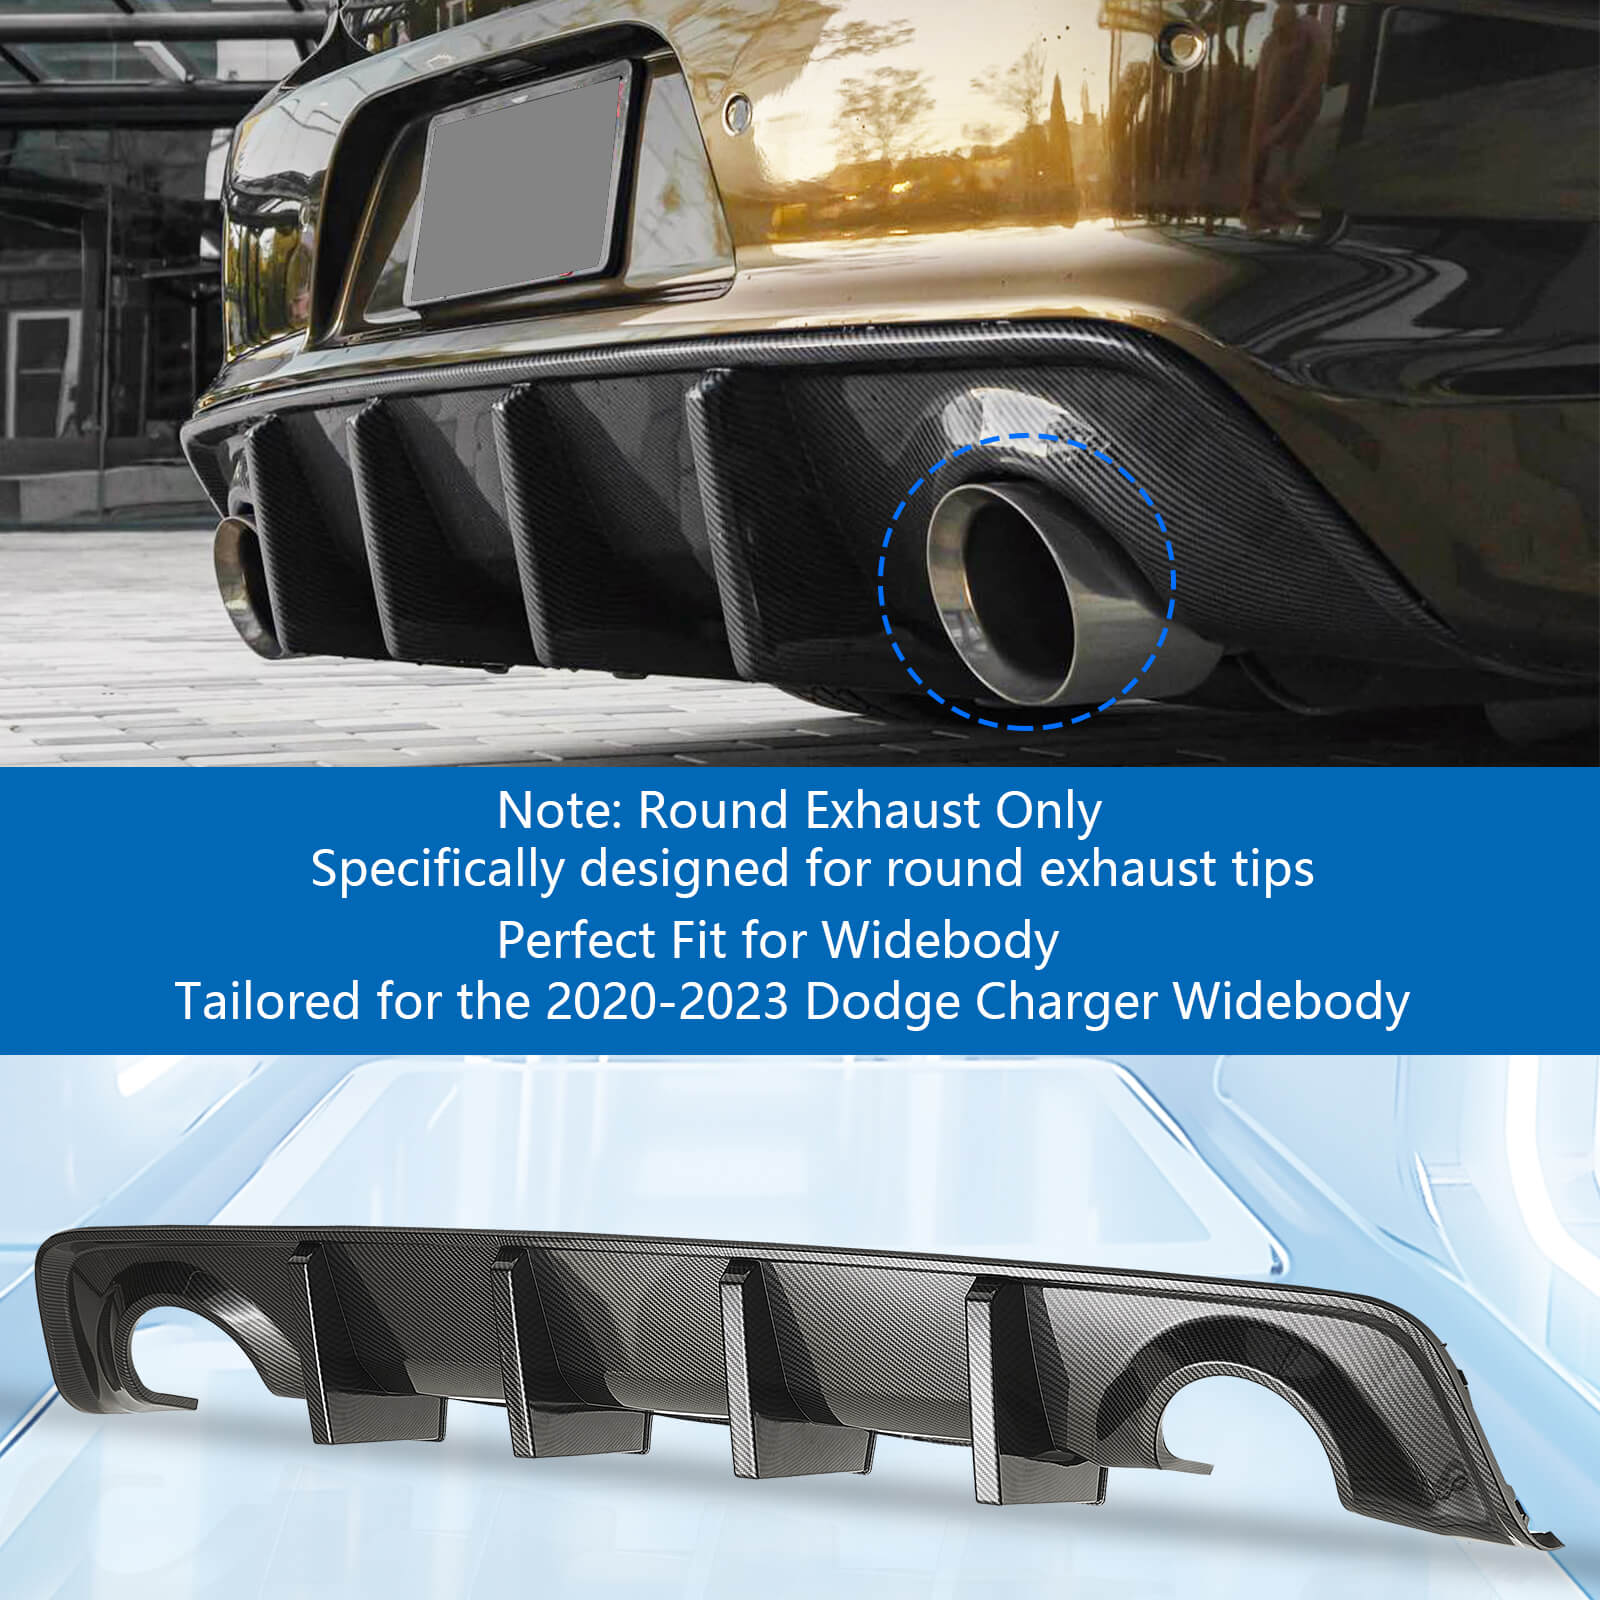 {WildWell}{Dodge Rear Diffuser}-{Dodge Charger Rear Diffuser 2020-2023 Widebody/3}-Carbon Fiber